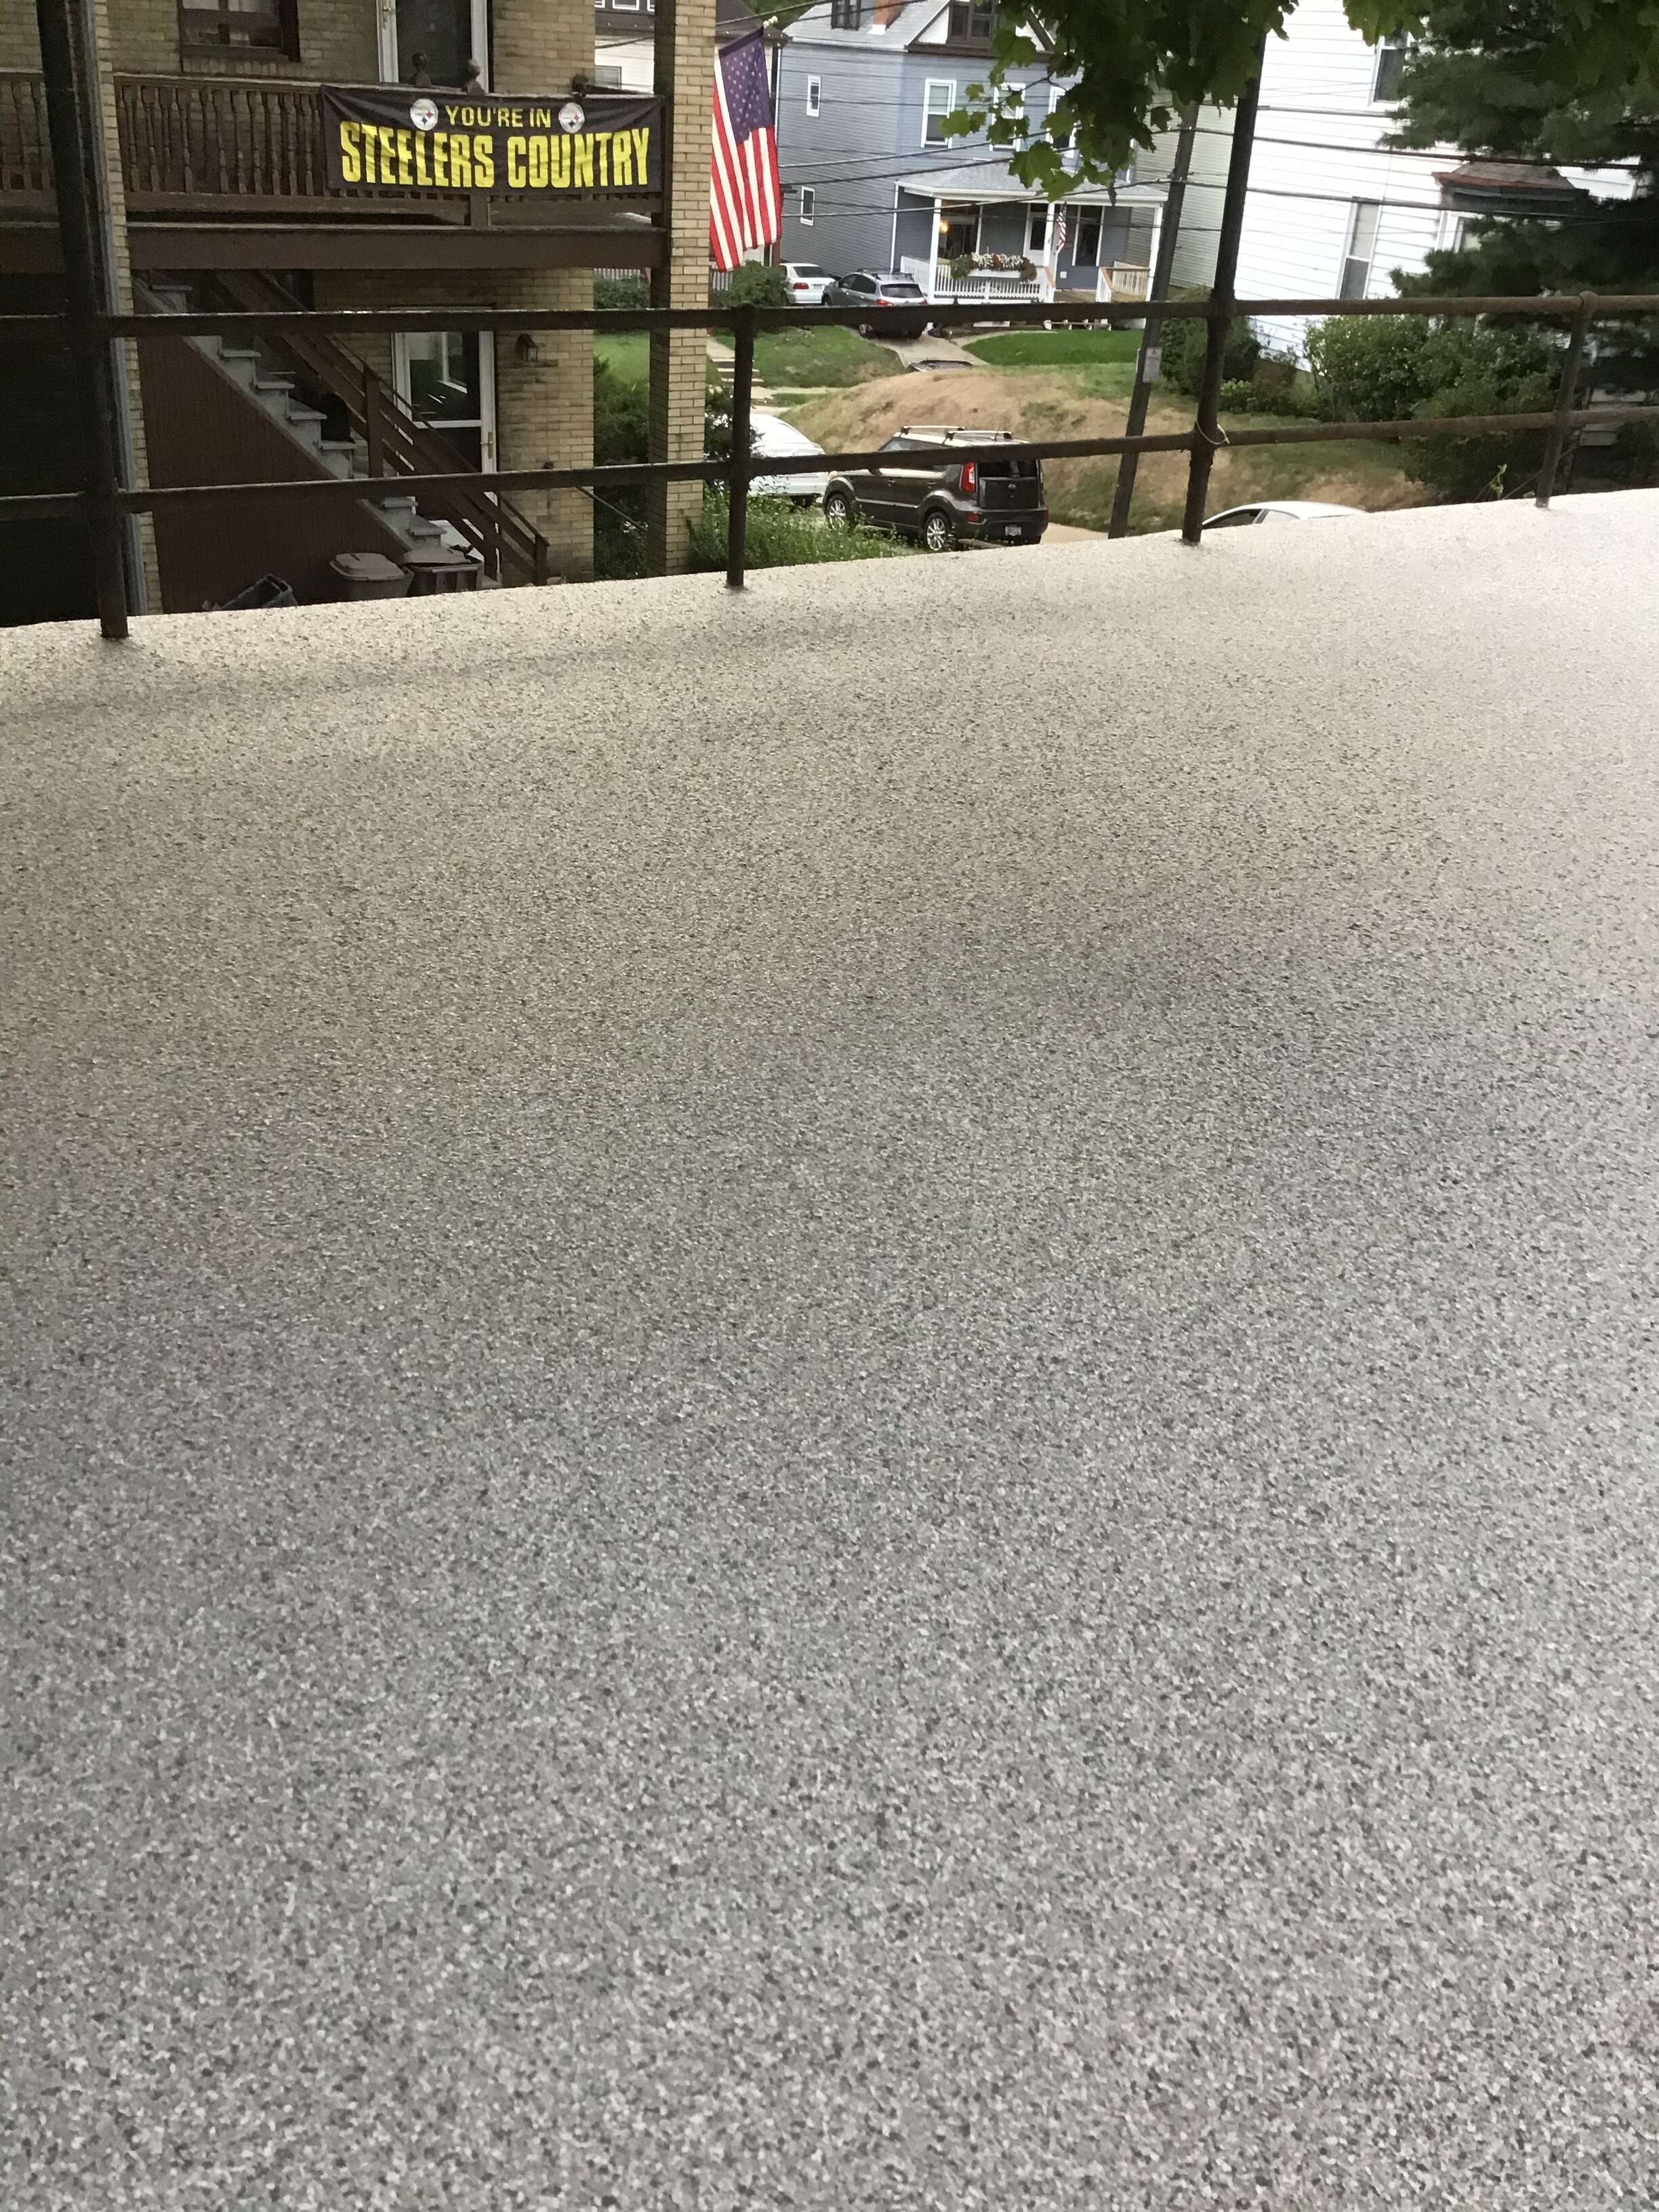 Residential Patio Floor - Floors in a day